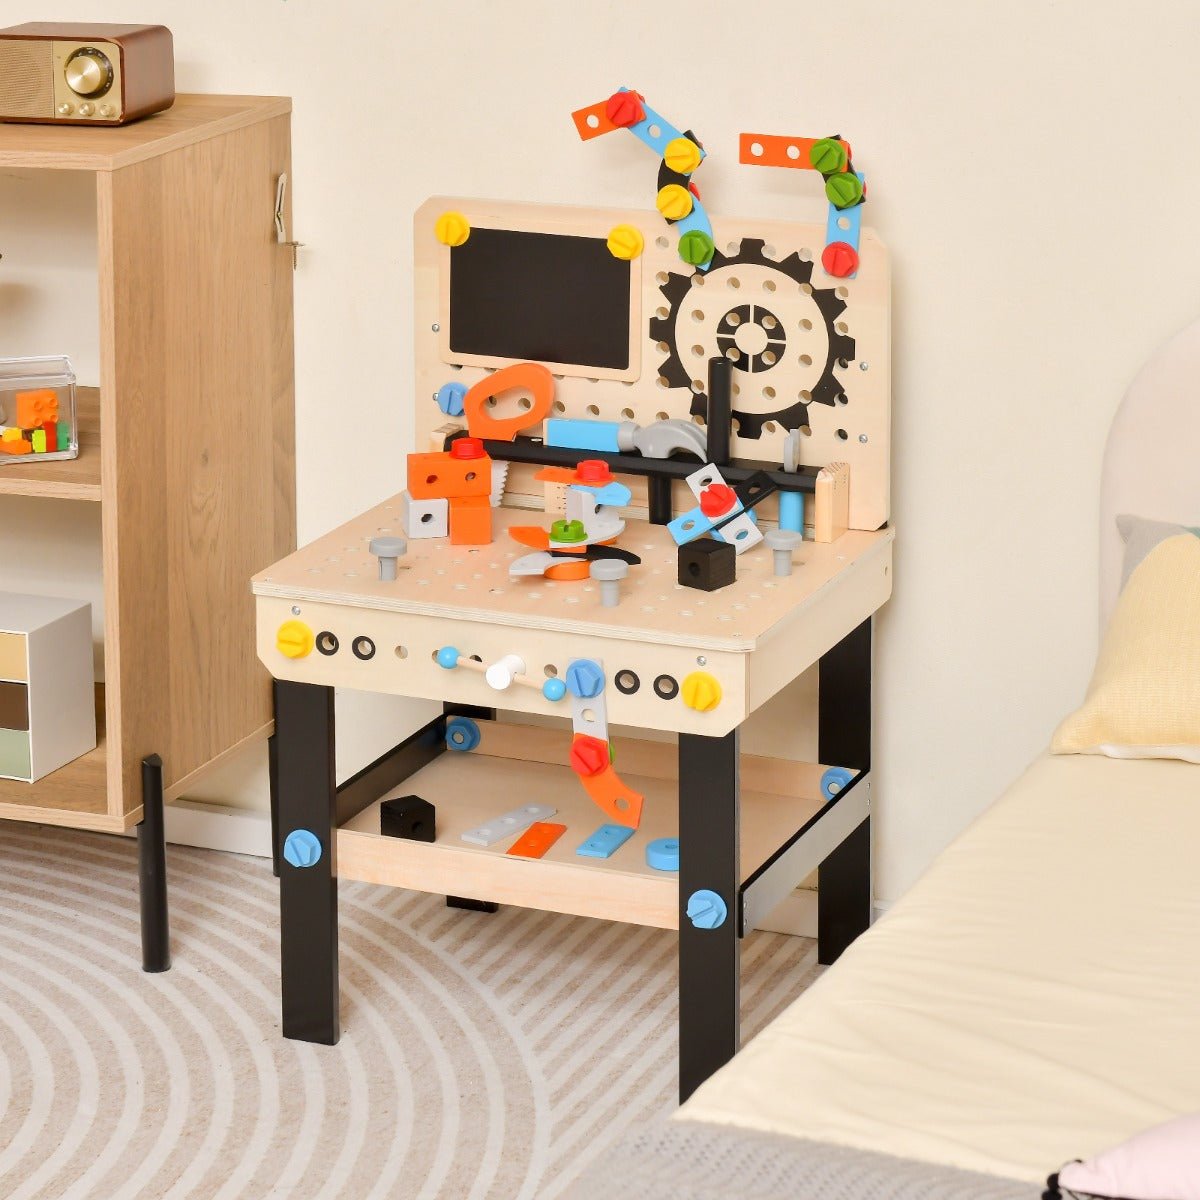 Safe and Exciting Playtime with Our Workbench Playset